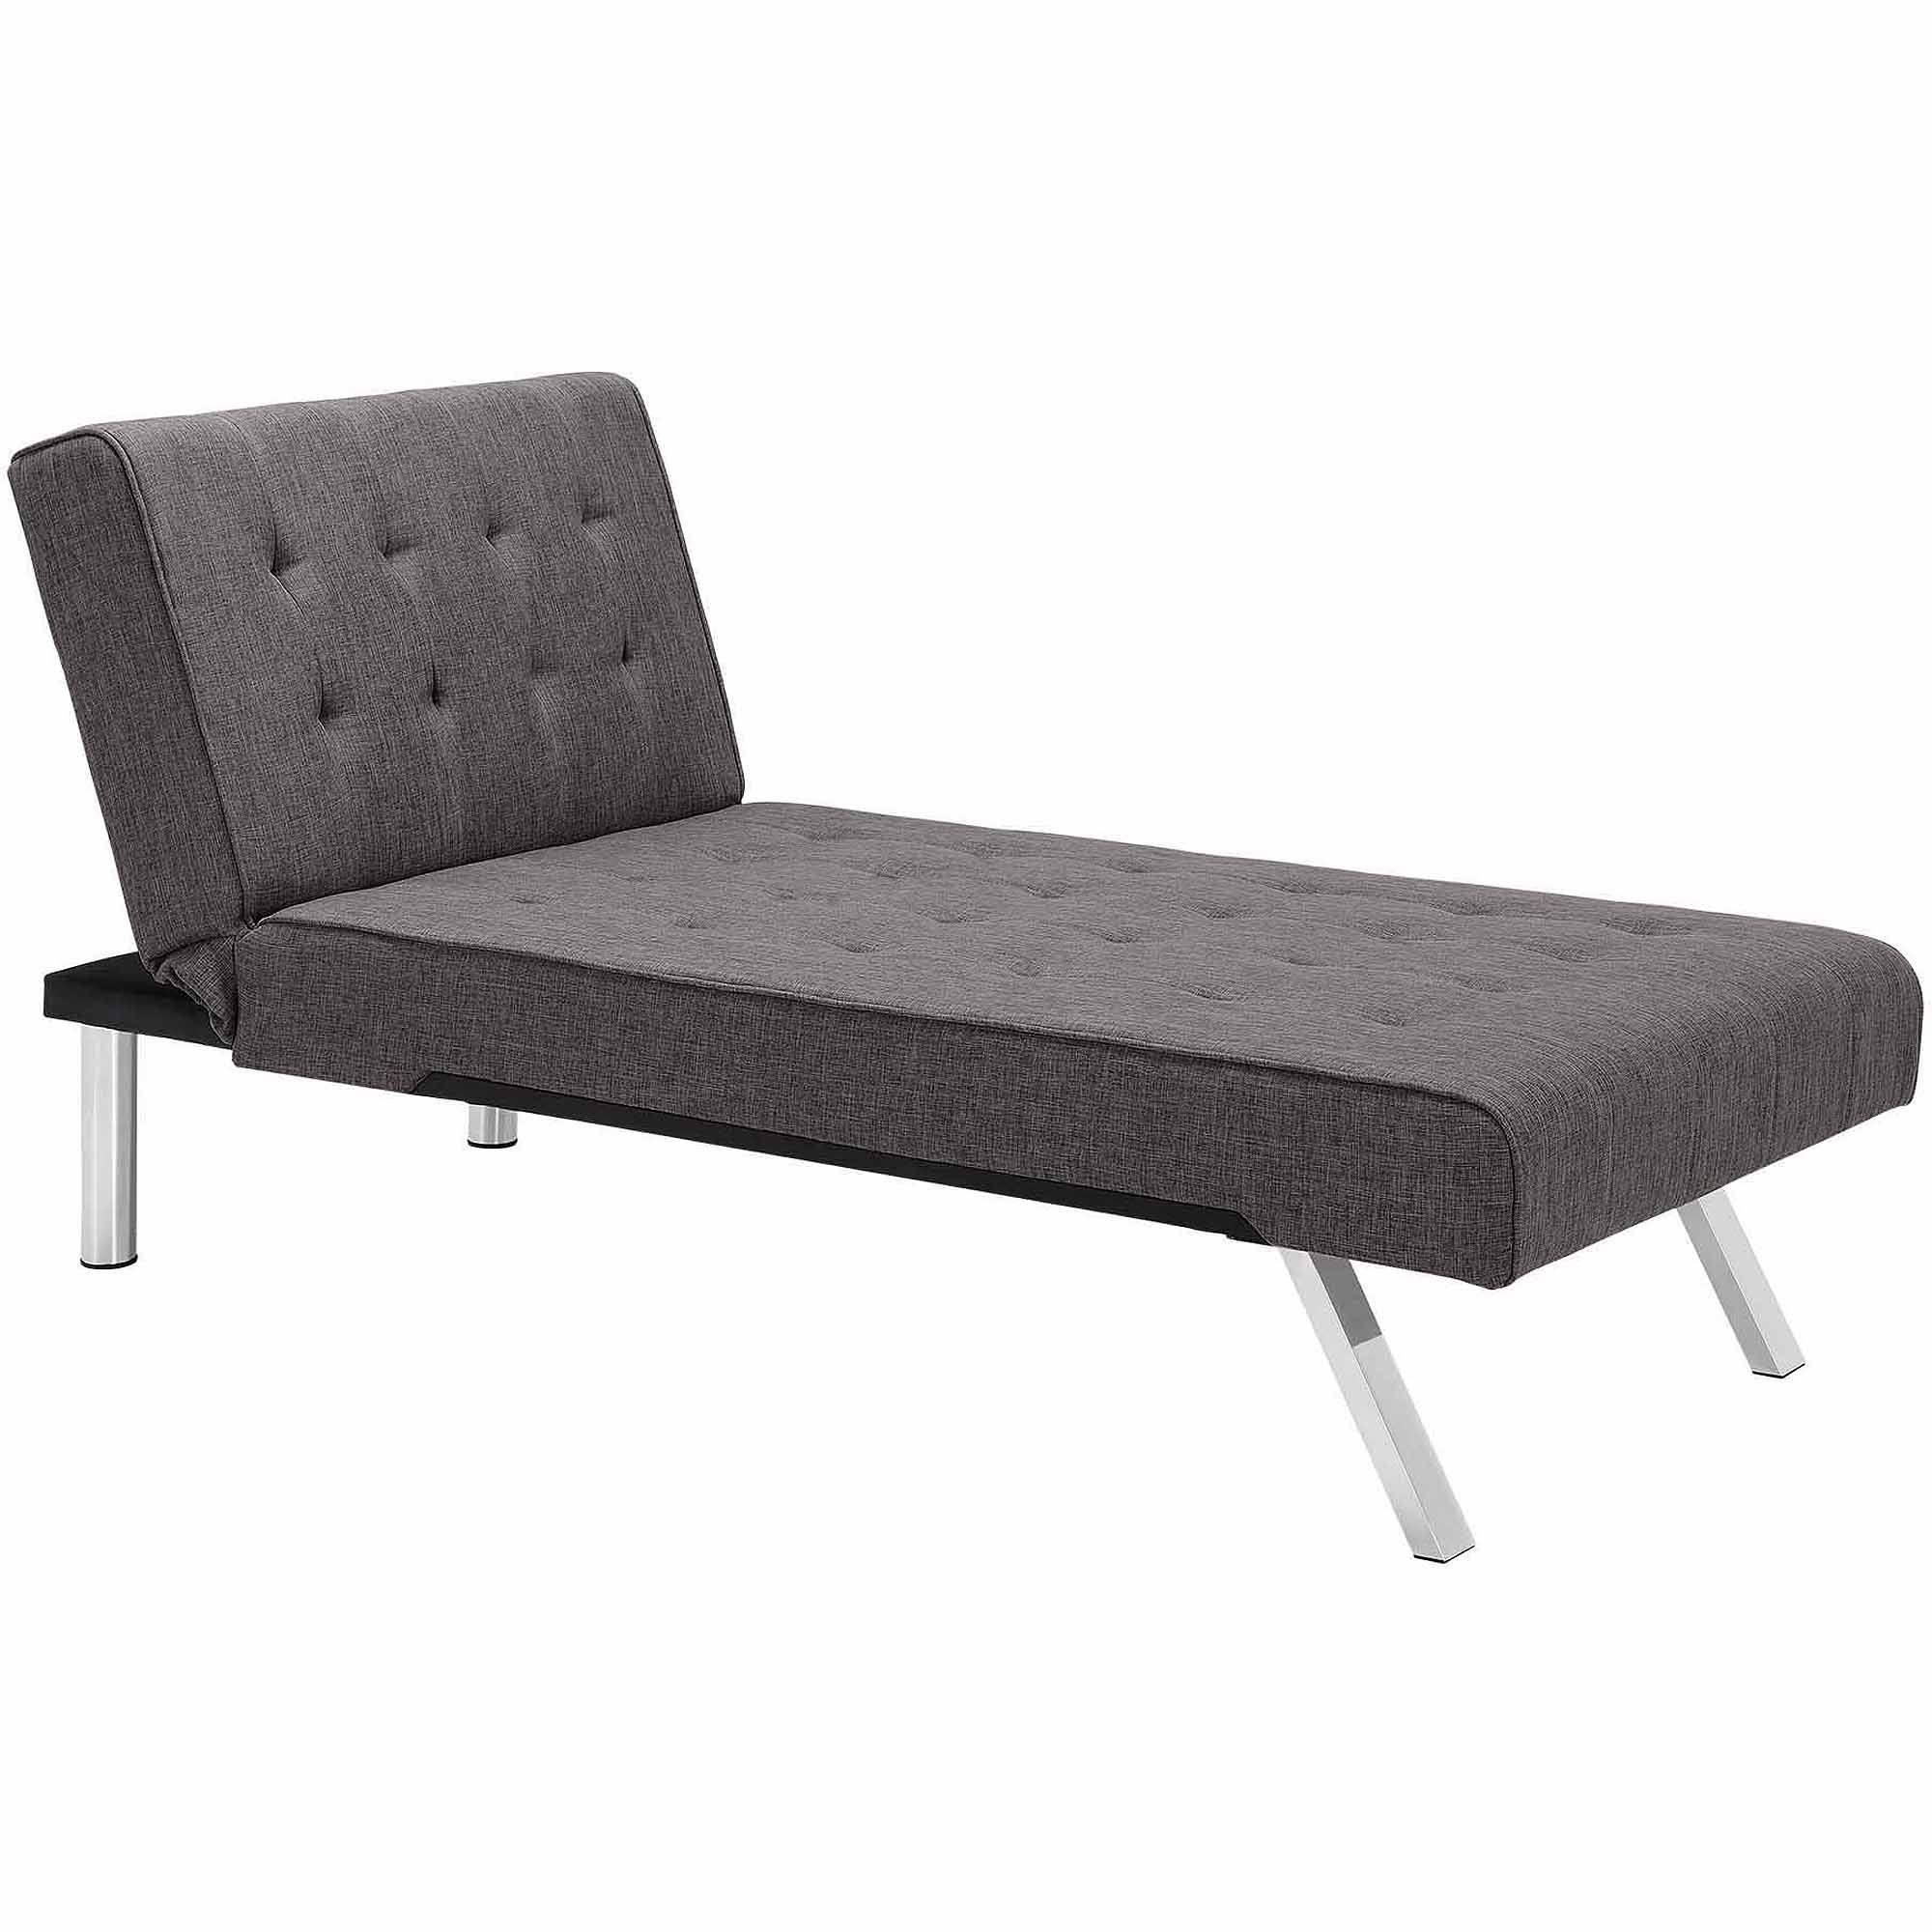 Preferred Walmart Chaise Lounges Intended For Dhp Emily Futon Chaise Lounger, Multiple Colors – Walmart (View 5 of 15)